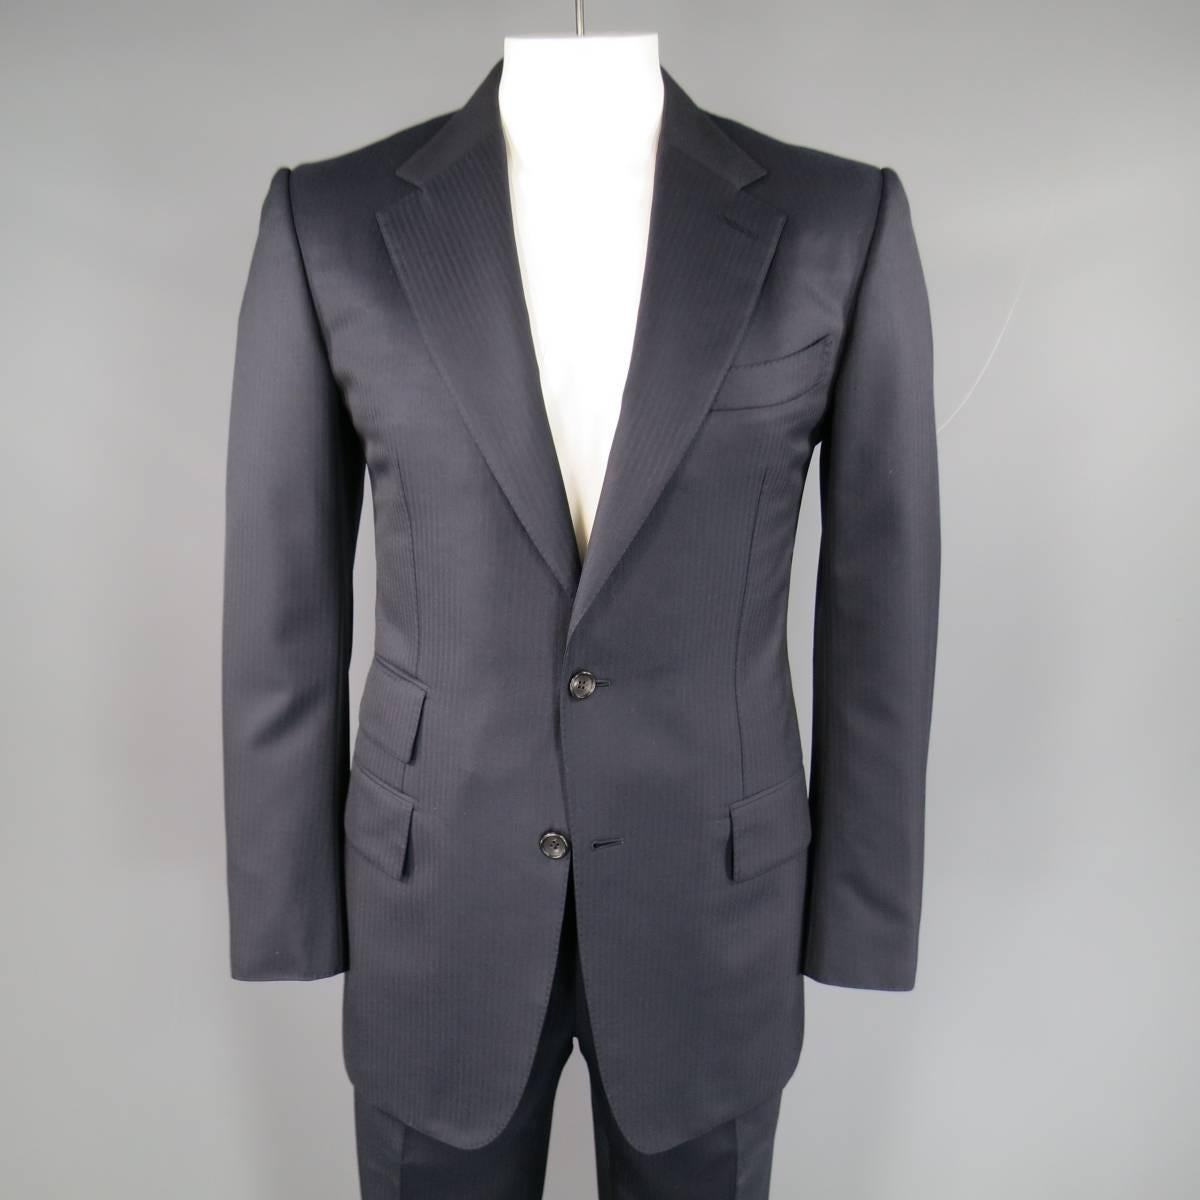 Classic TOM FORD suit in deep Midnight Navy blue striped wool twill includes a two button 40 long sport coat with triple flap pockets, notch lapel, functional button cuffs, and double vented back and flat front trousers with cuffed hem and signature